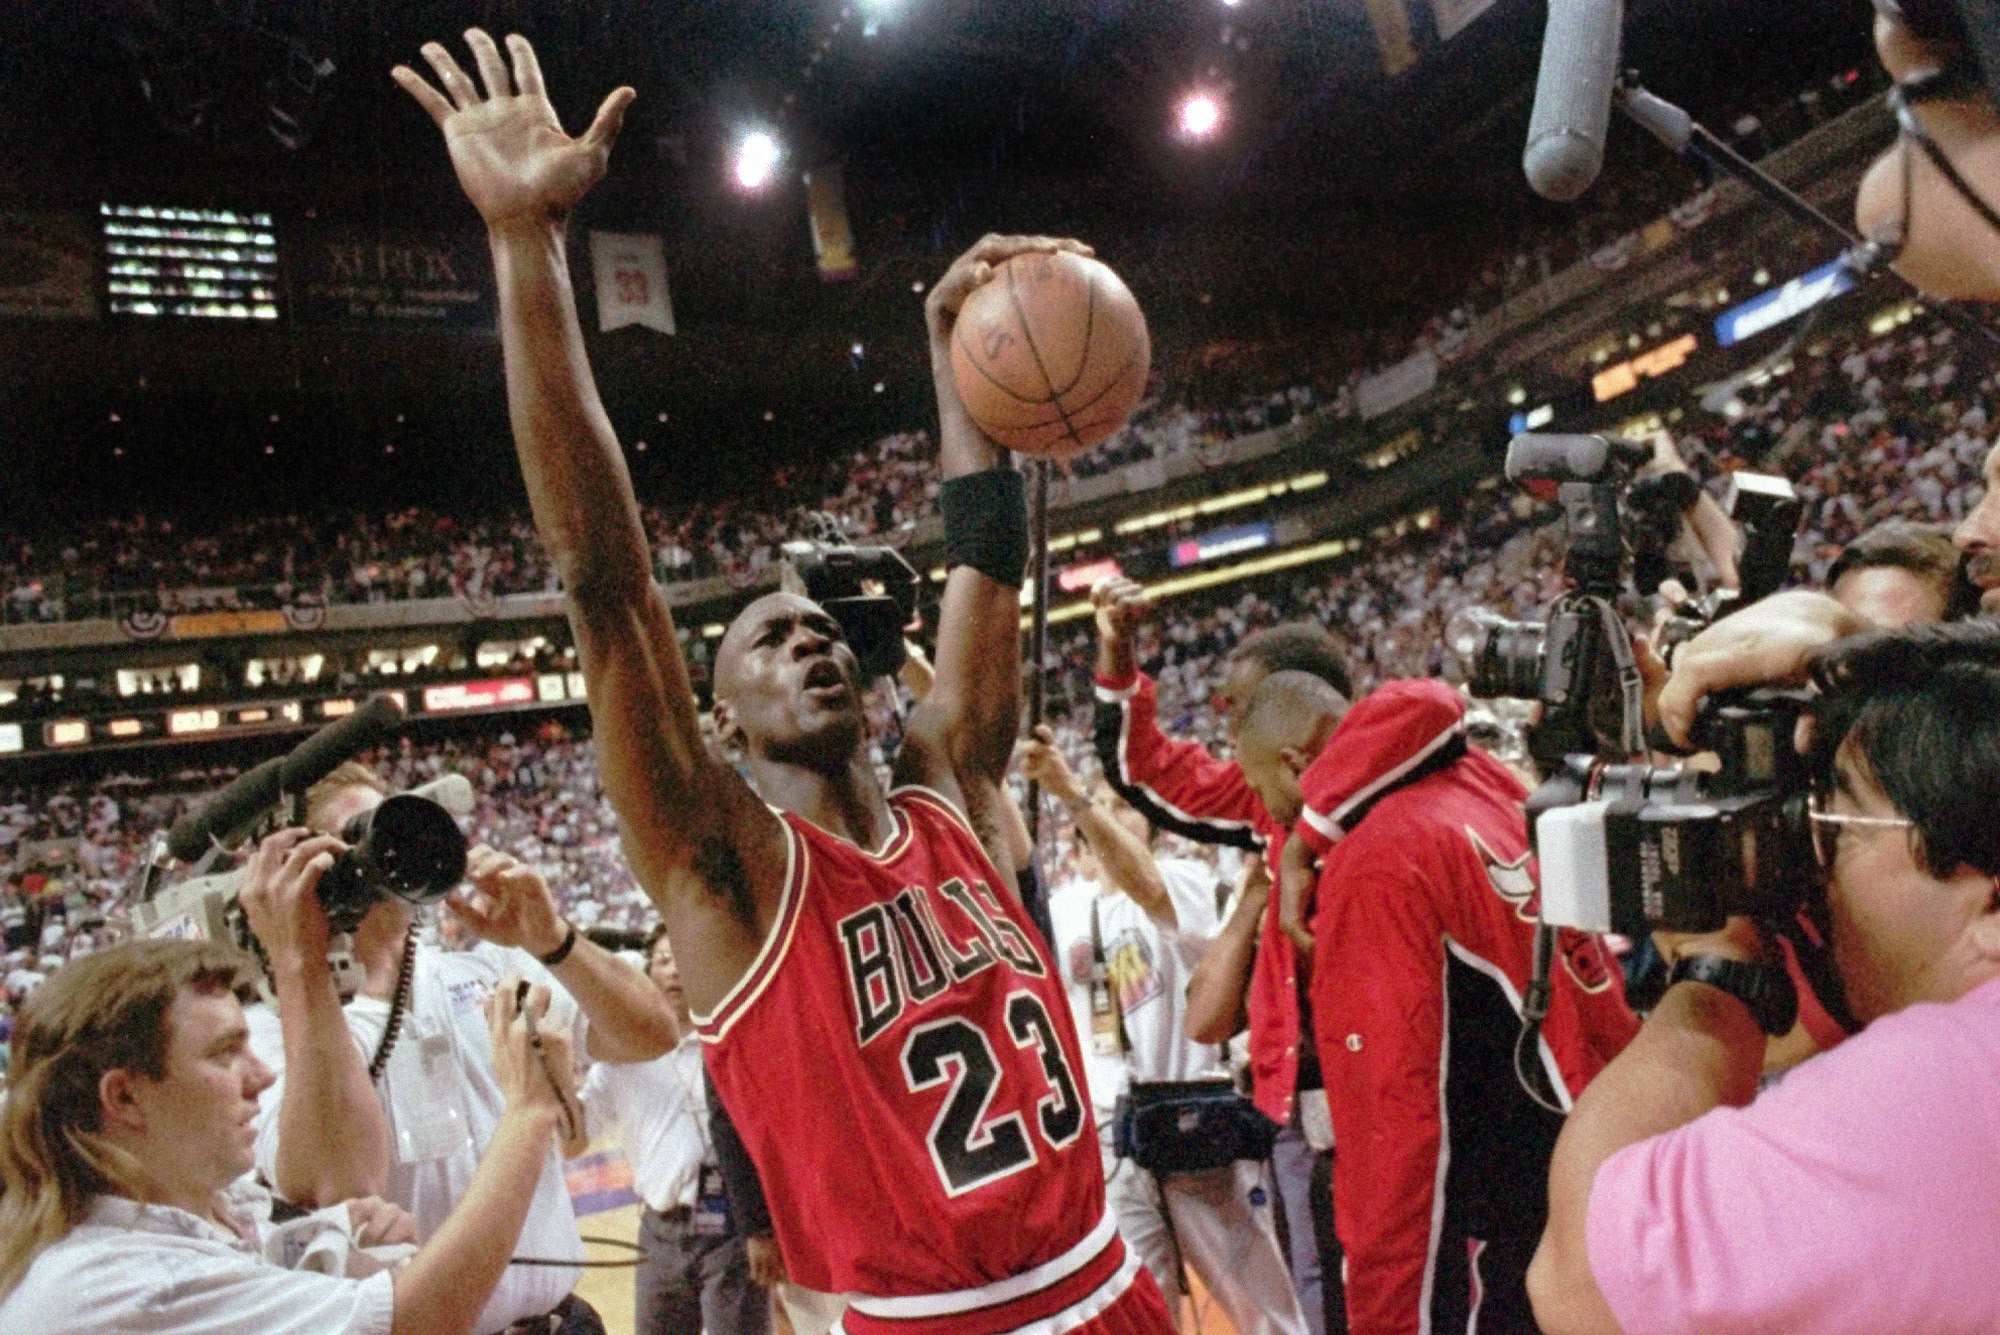 Was Michael Jordan's final shot with the Bulls a foul? A retired